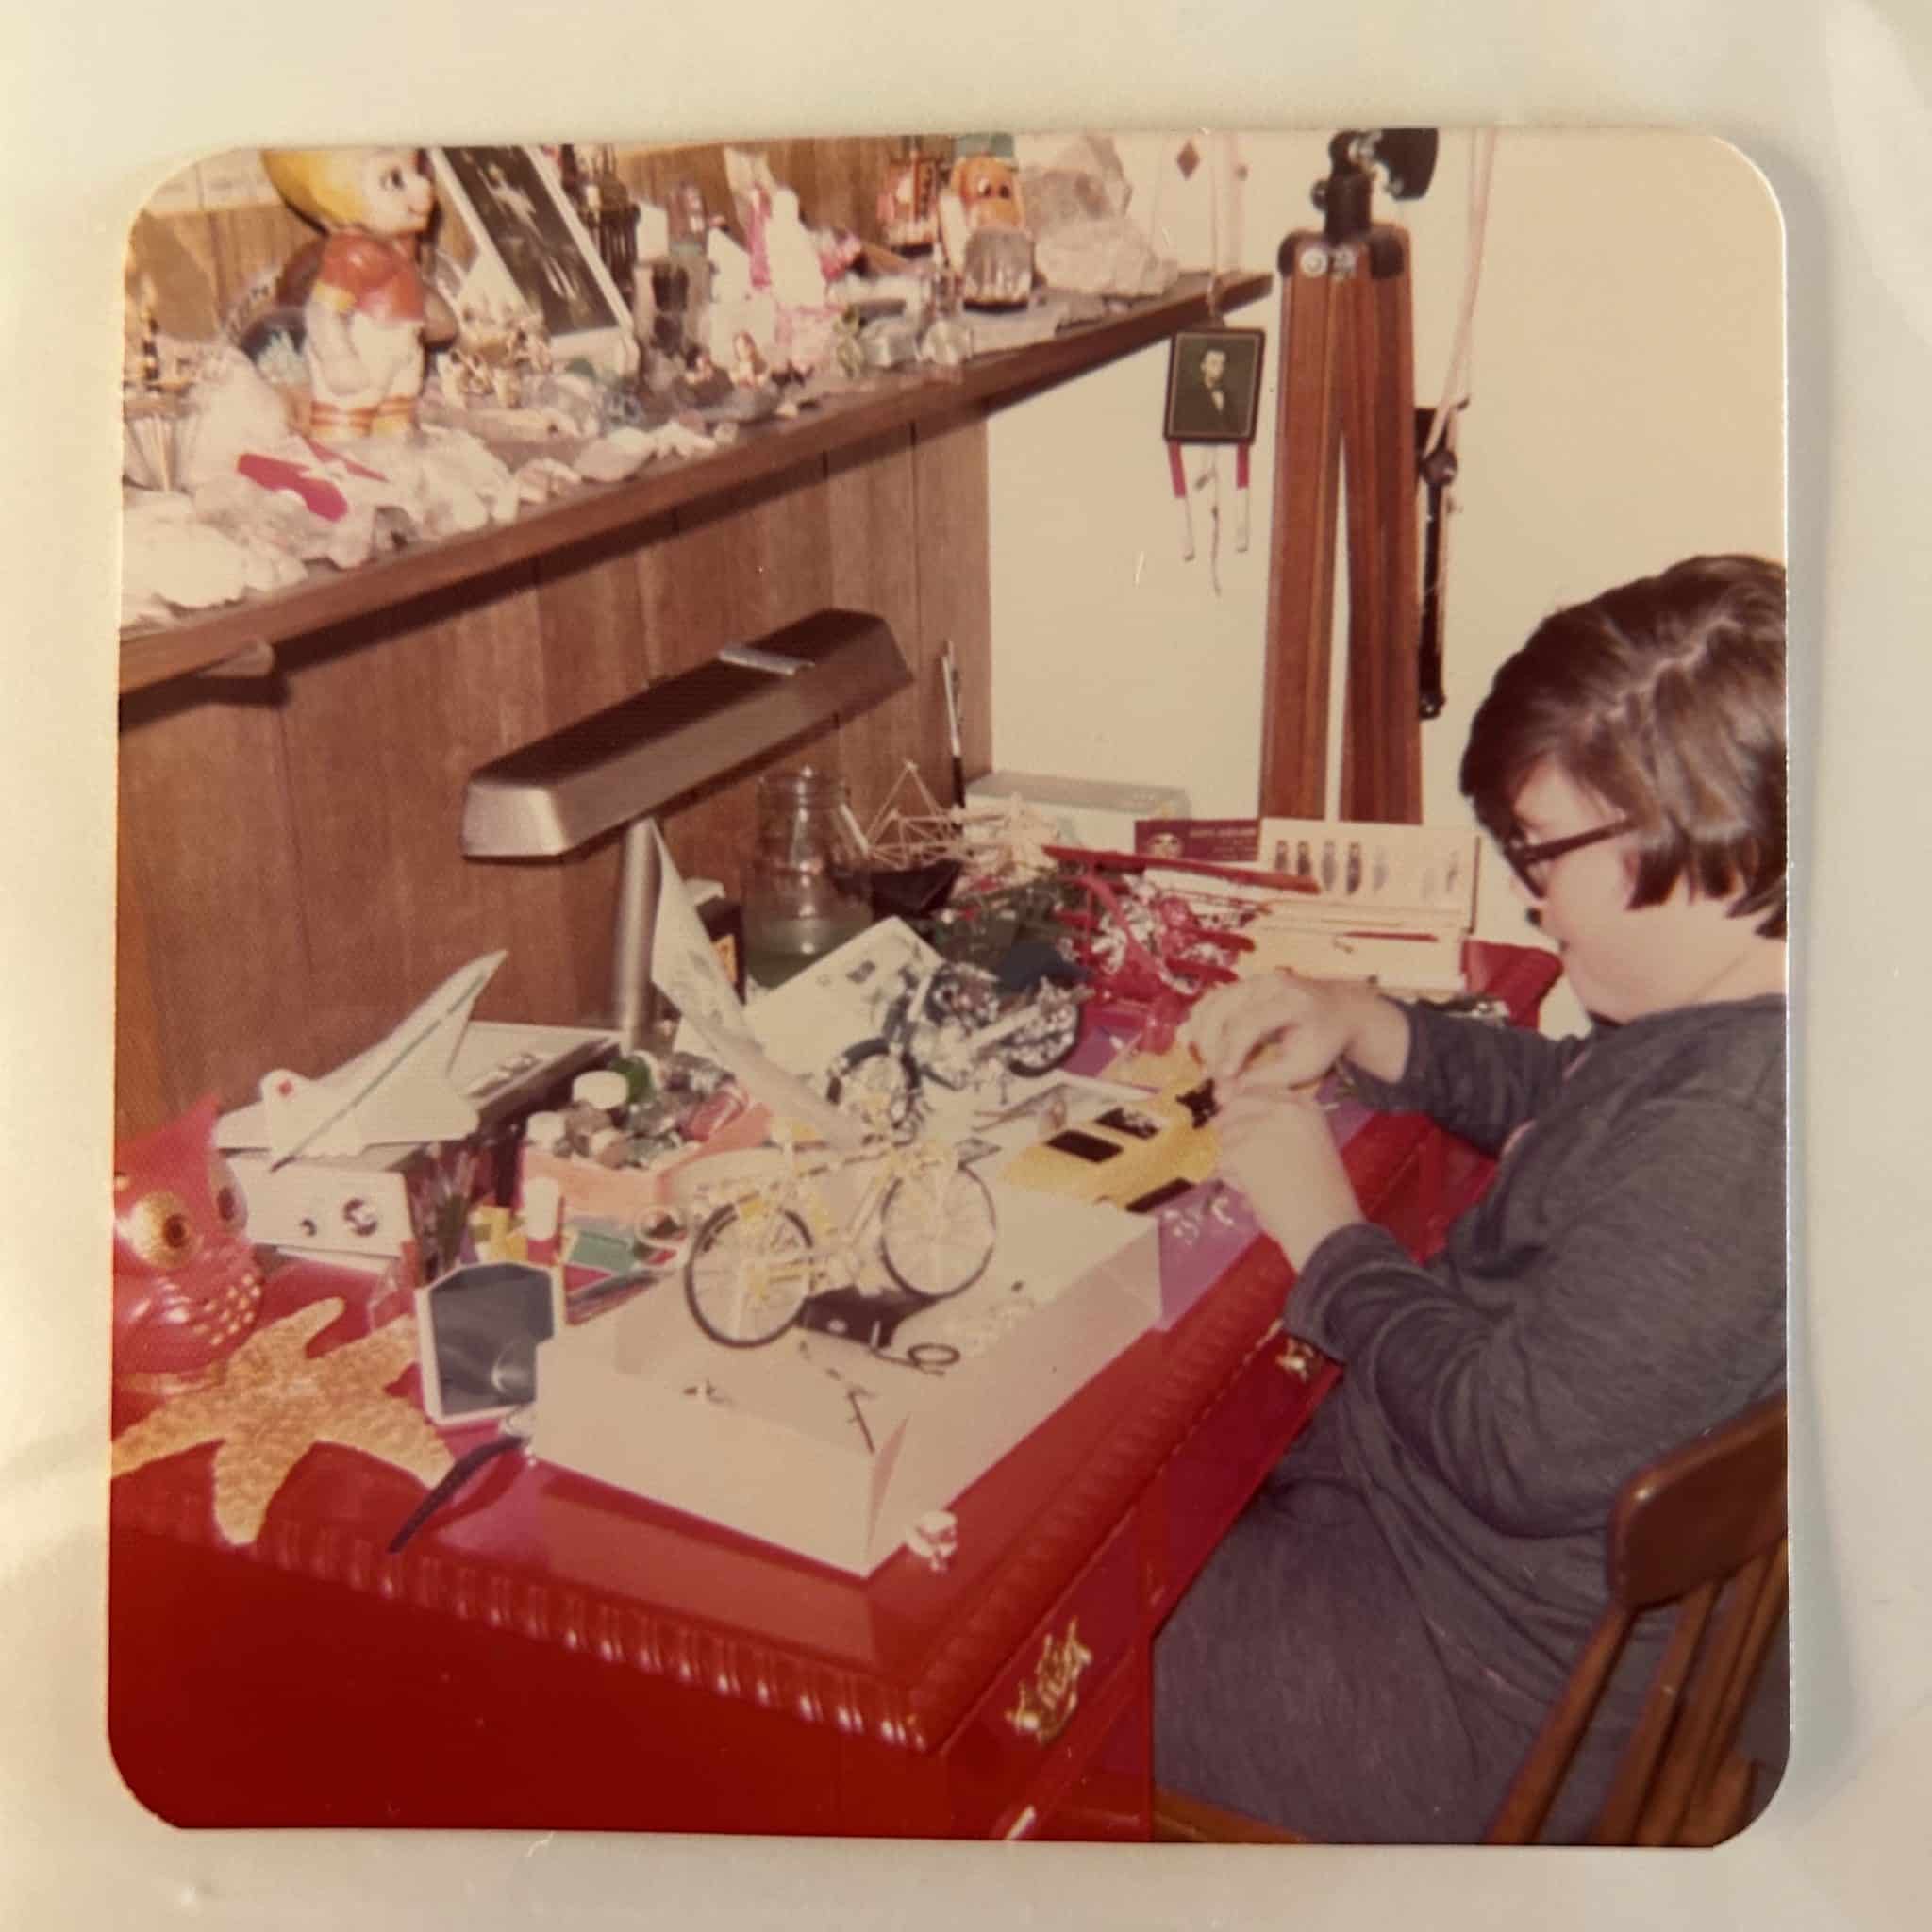 Stephen Farley building scale models in his bedroom, age 11. On his desk are scale models of a bicycle, motorcycle, old car, Concorde jet, and a Fokker triplane, along with various paints and X-Acto knives.